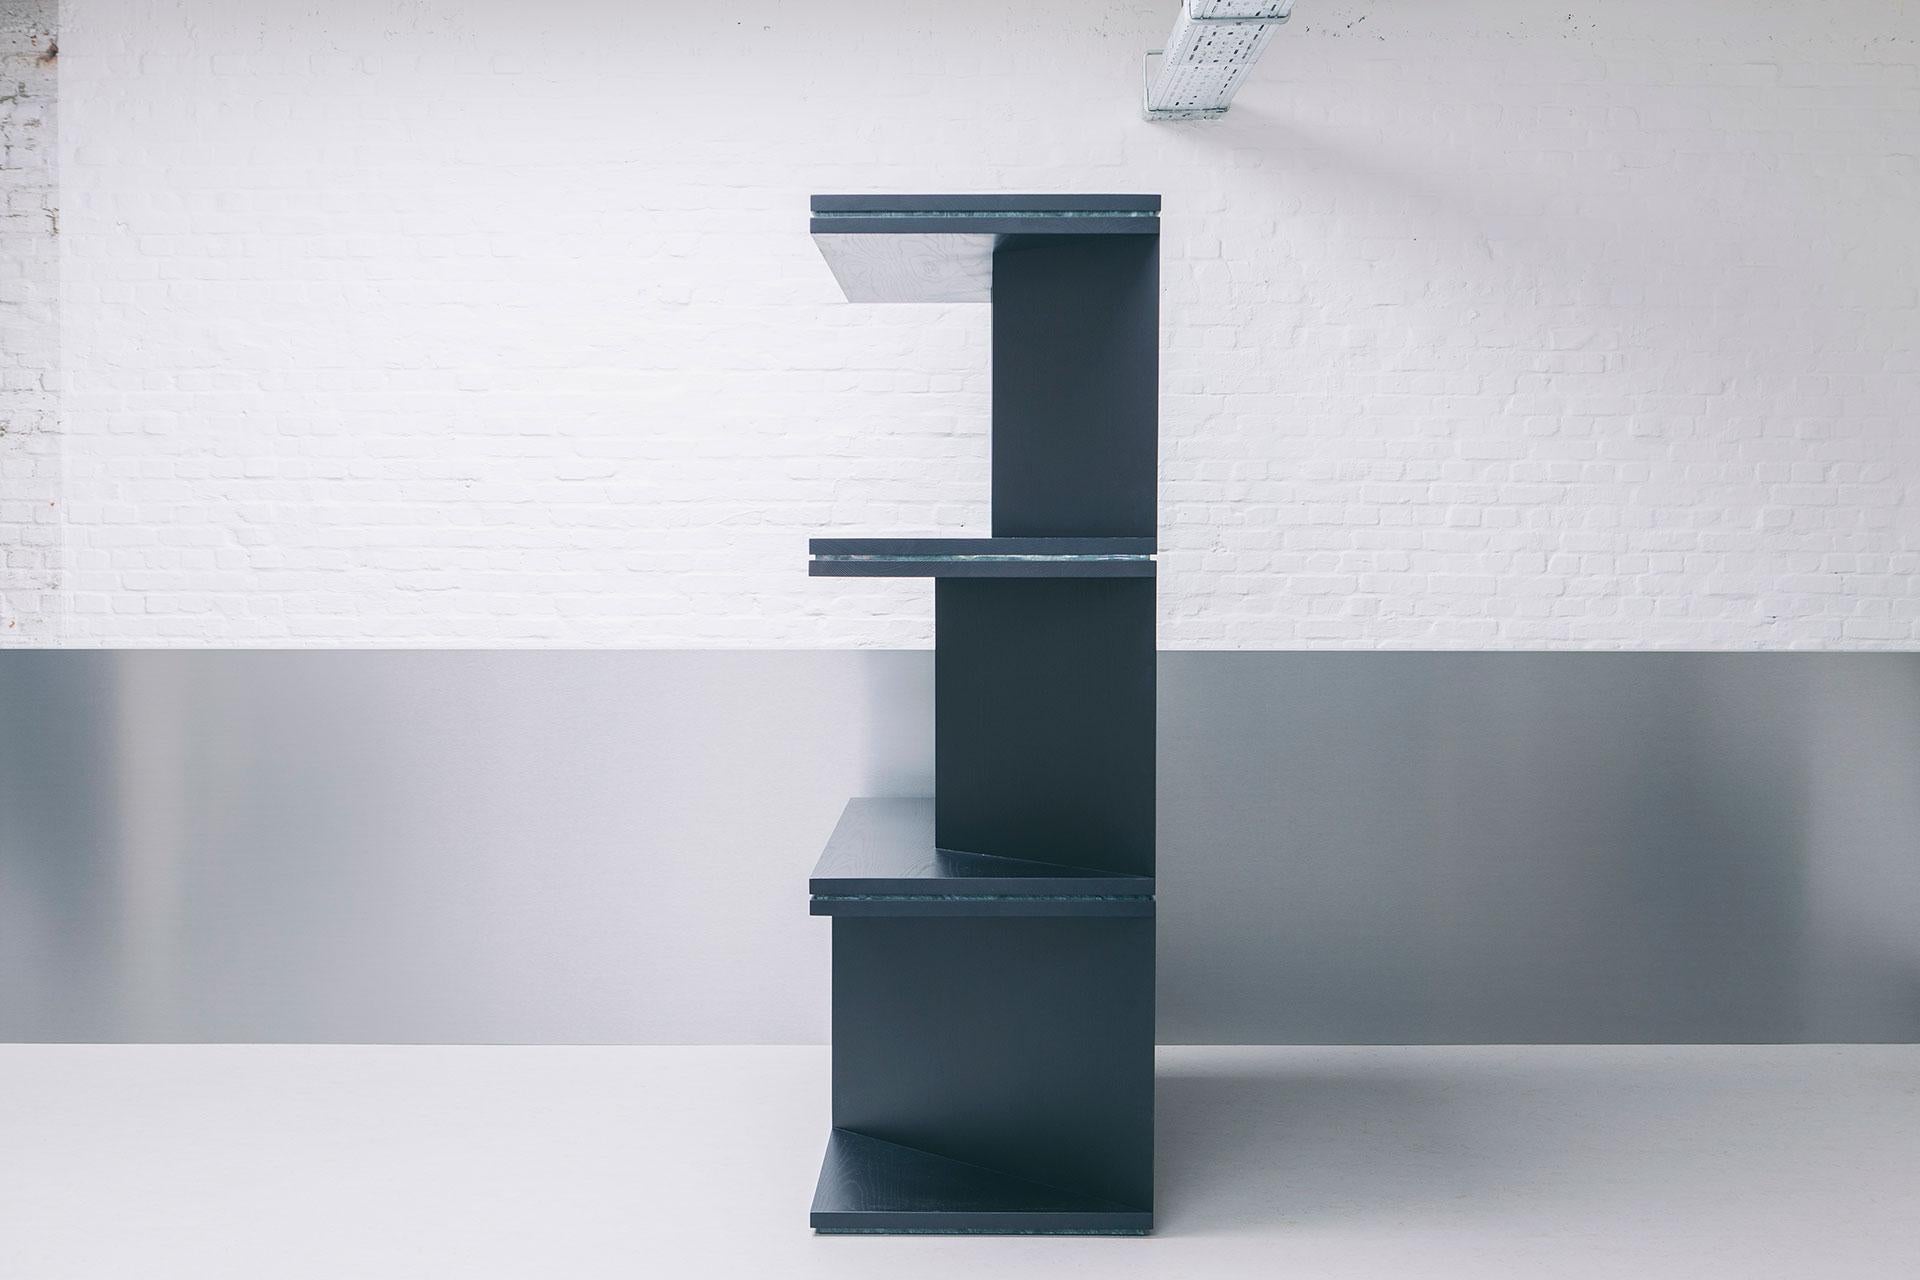 Oblique 01.1, a room divider that knows how to divide every space, without losing the sense of spaciousness. Inspired by Le Corbusier’s Tower of Shadows, the oblique subdivisions make this object unique and recognizable. The vertical elements